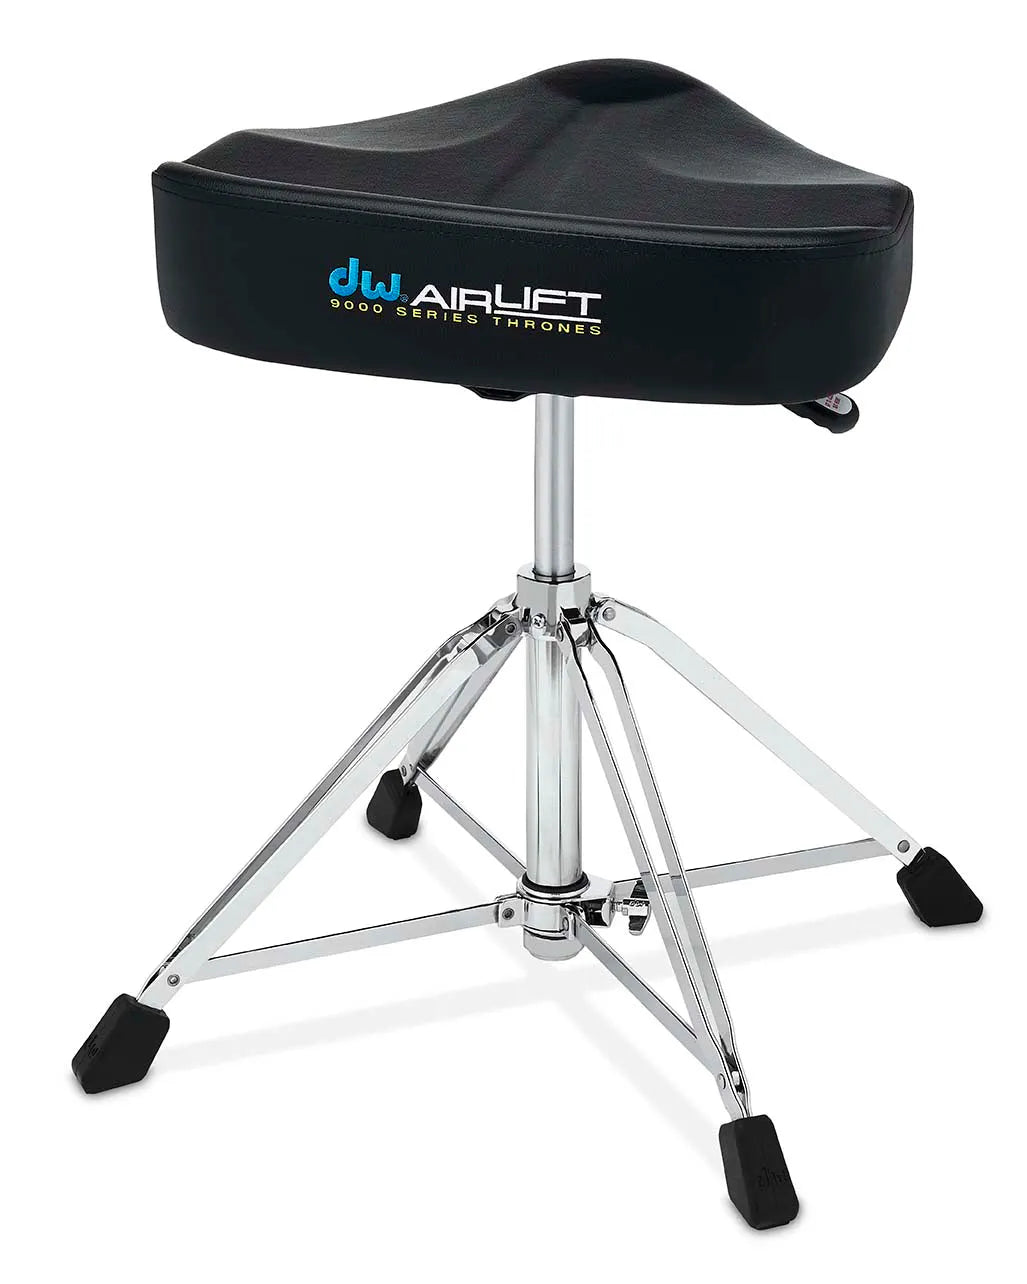 Choosing the Best Drum Throne for You